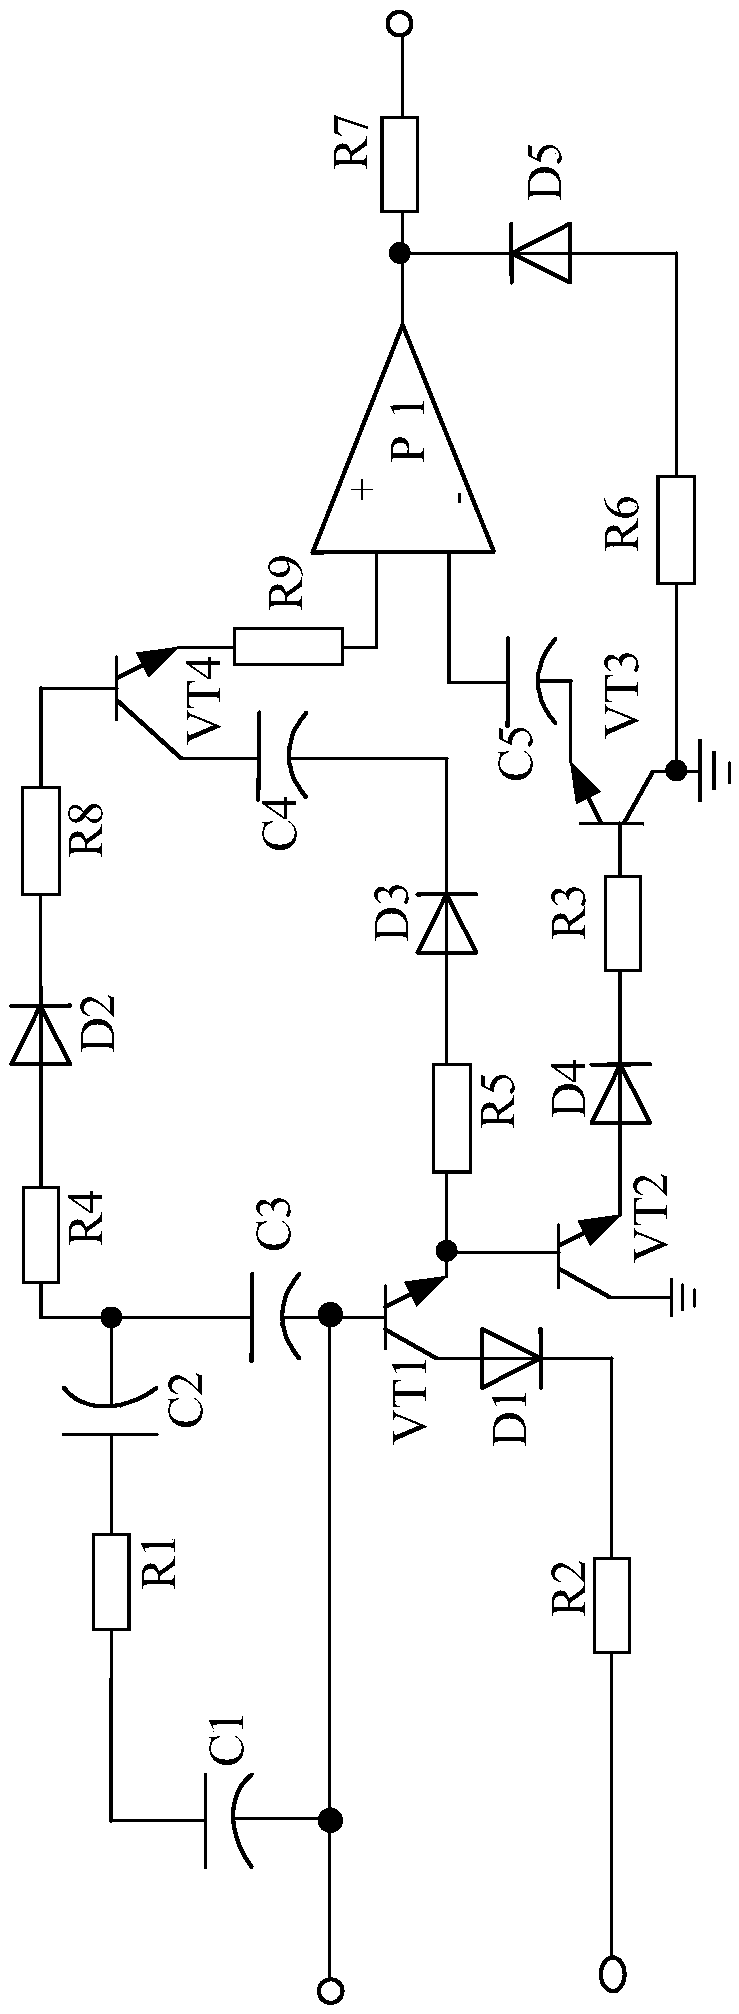 Intelligent electronic water meter control system based on voltage-stabilization type logic gate protection circuit